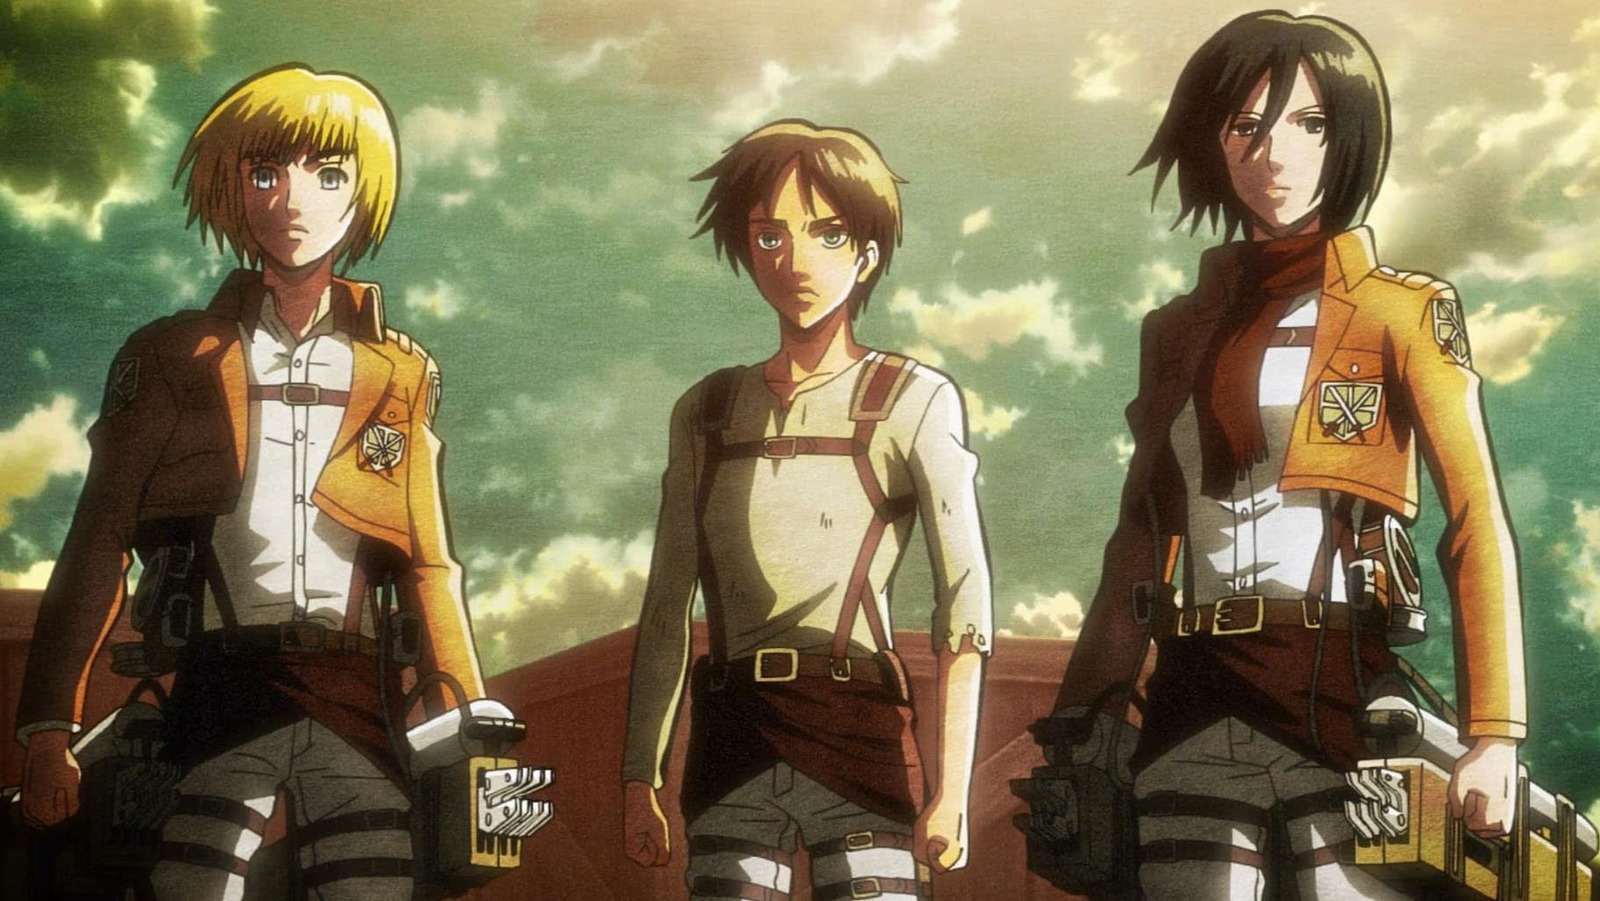 The Post-Apocalyptic Anime Series That's Killing It On Hulu